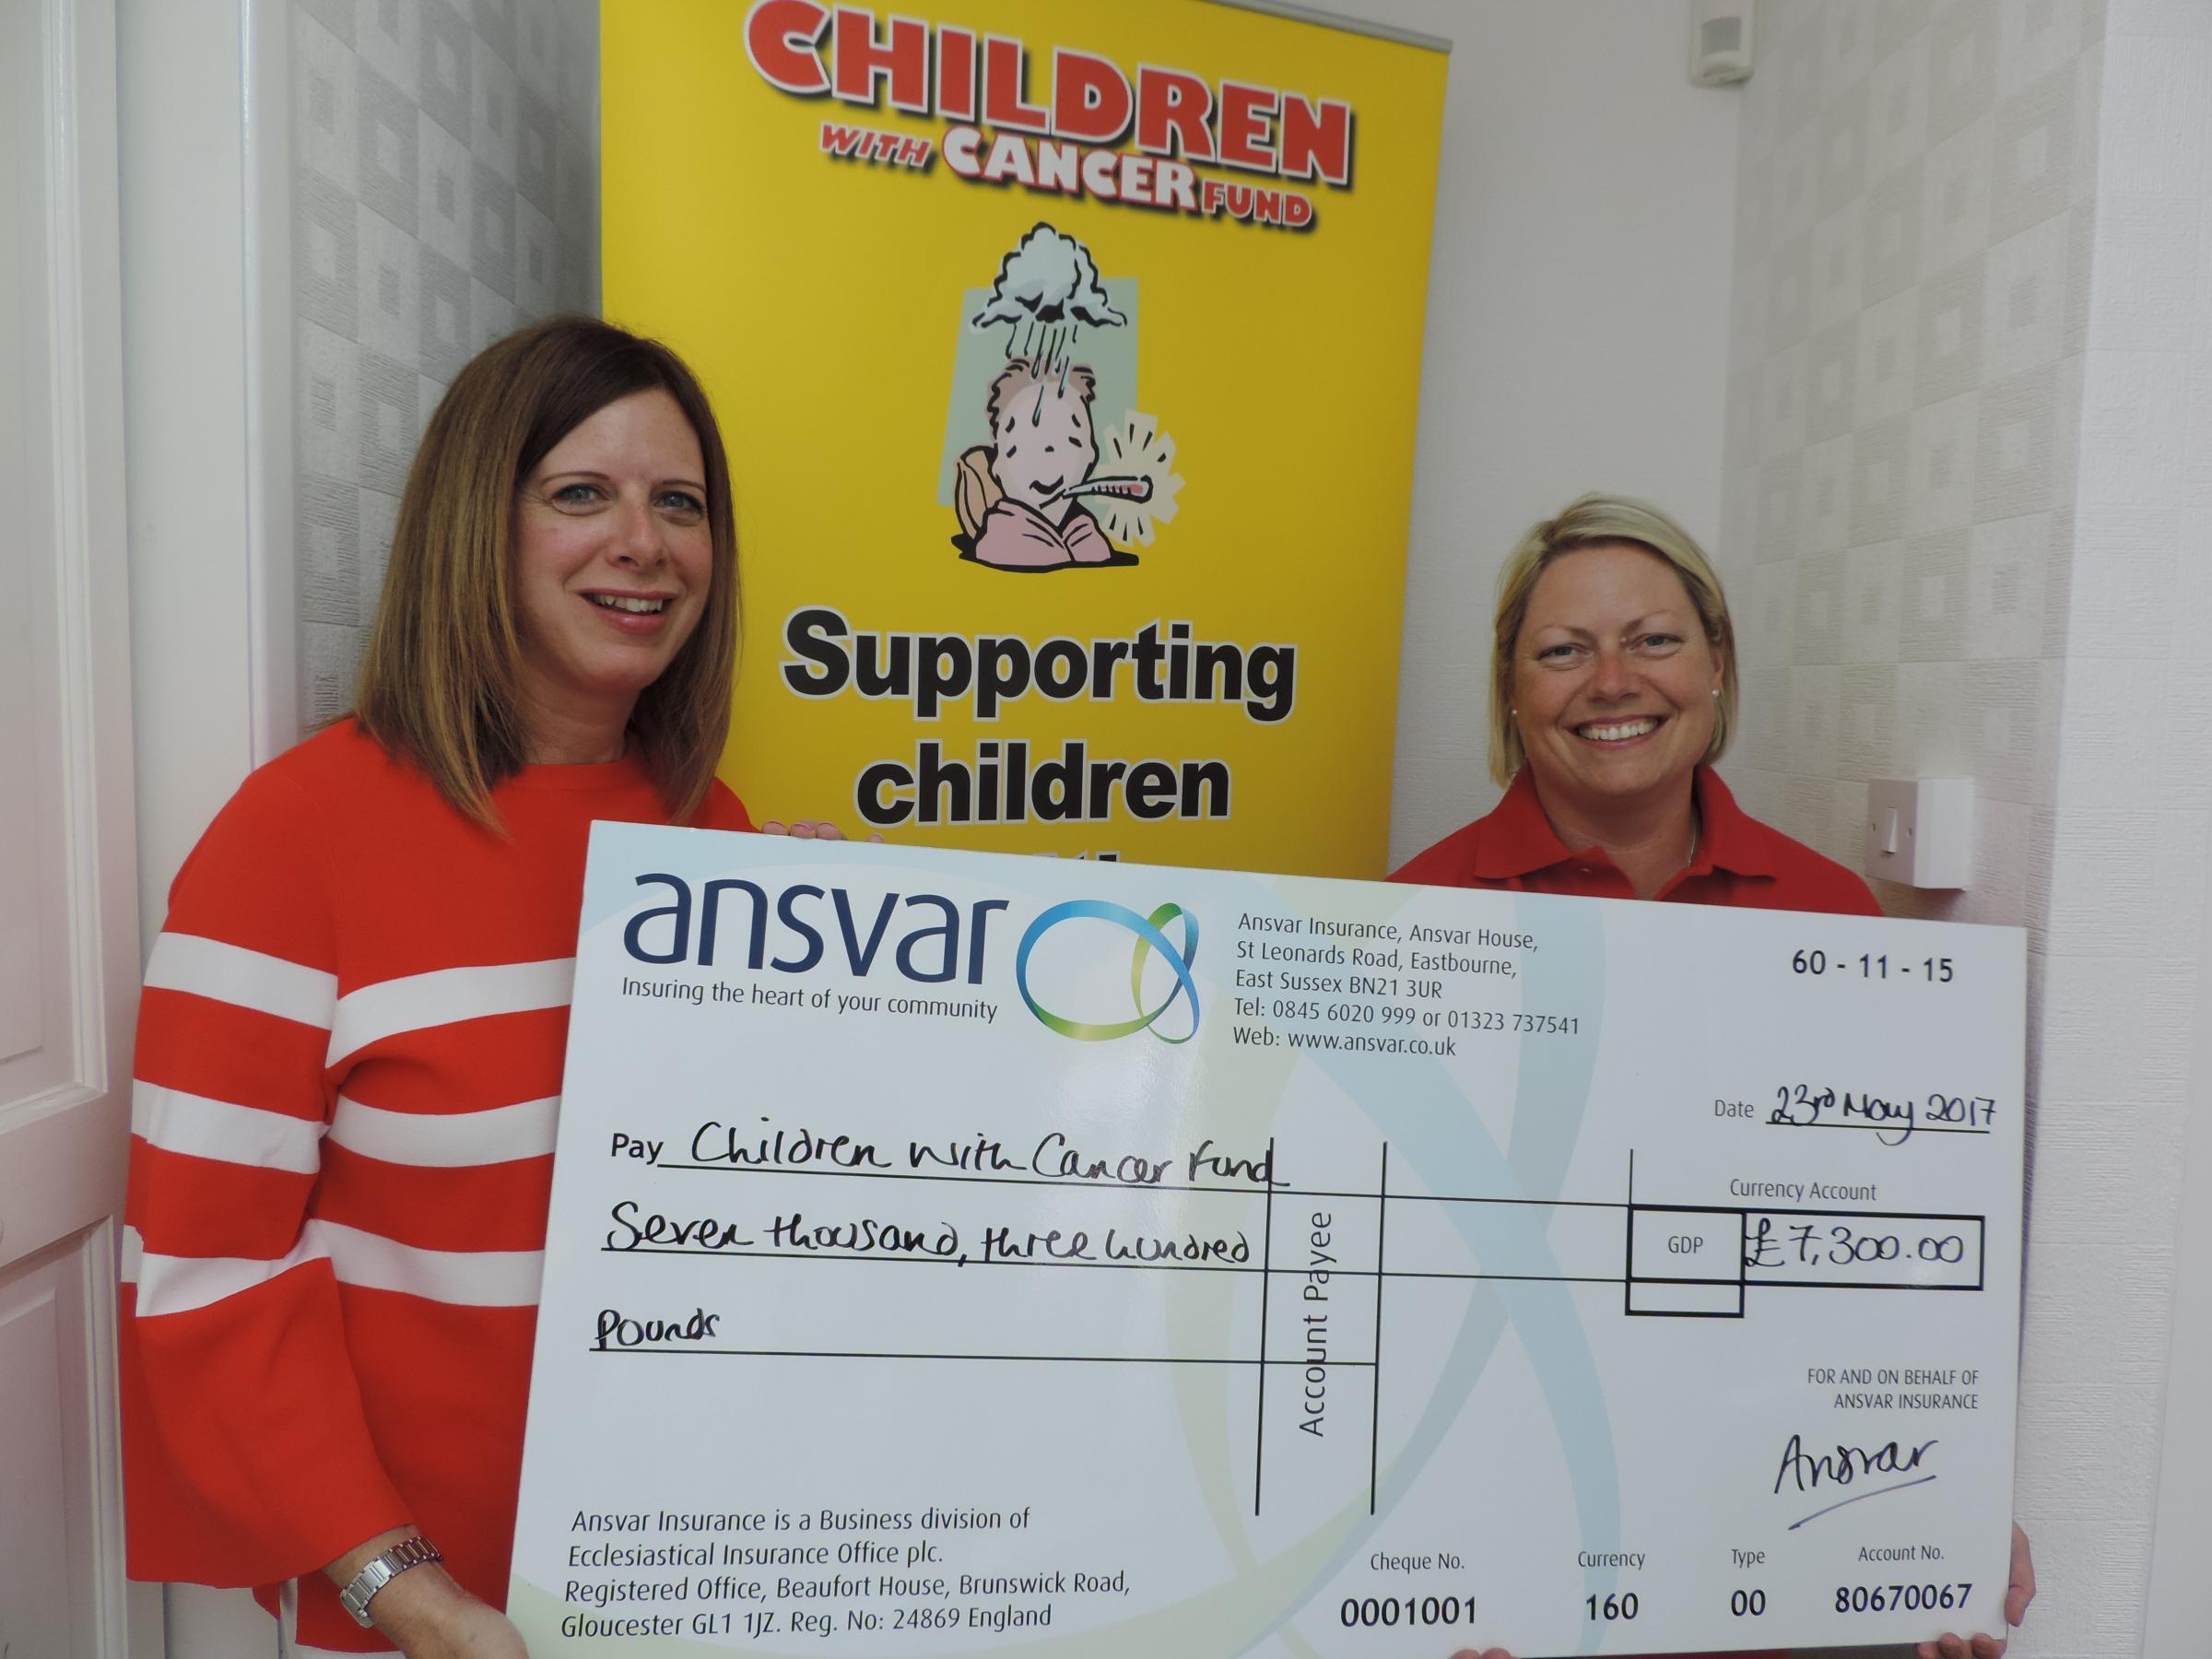 Insurance brokers boost charity fund